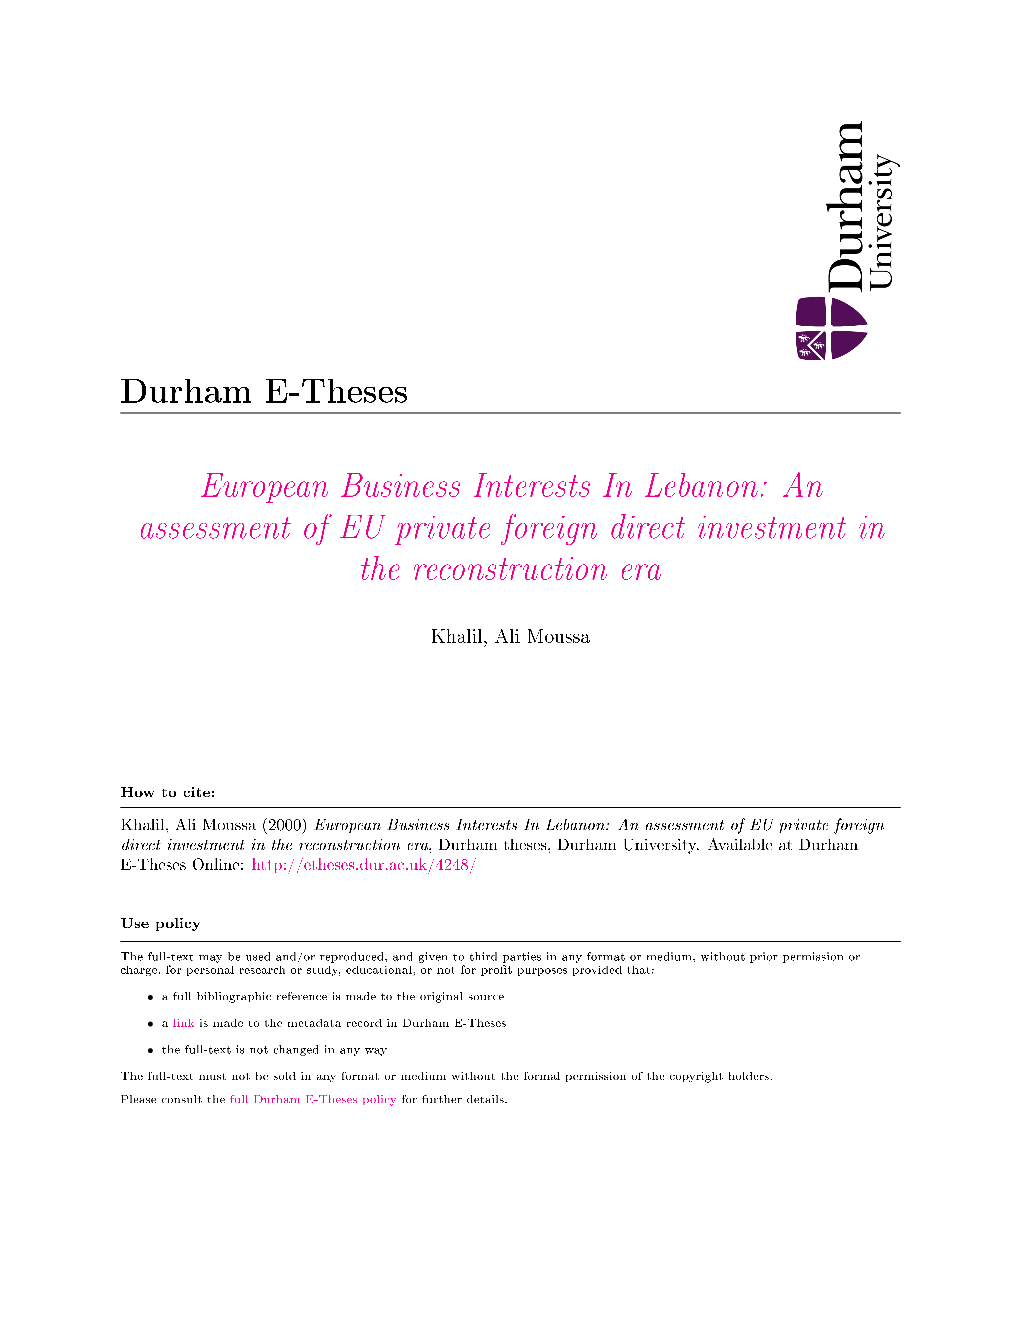 European Business Interests in Lebanon: an Assessment of EU Private Foreign Direct Investment in the Reconstruction Era